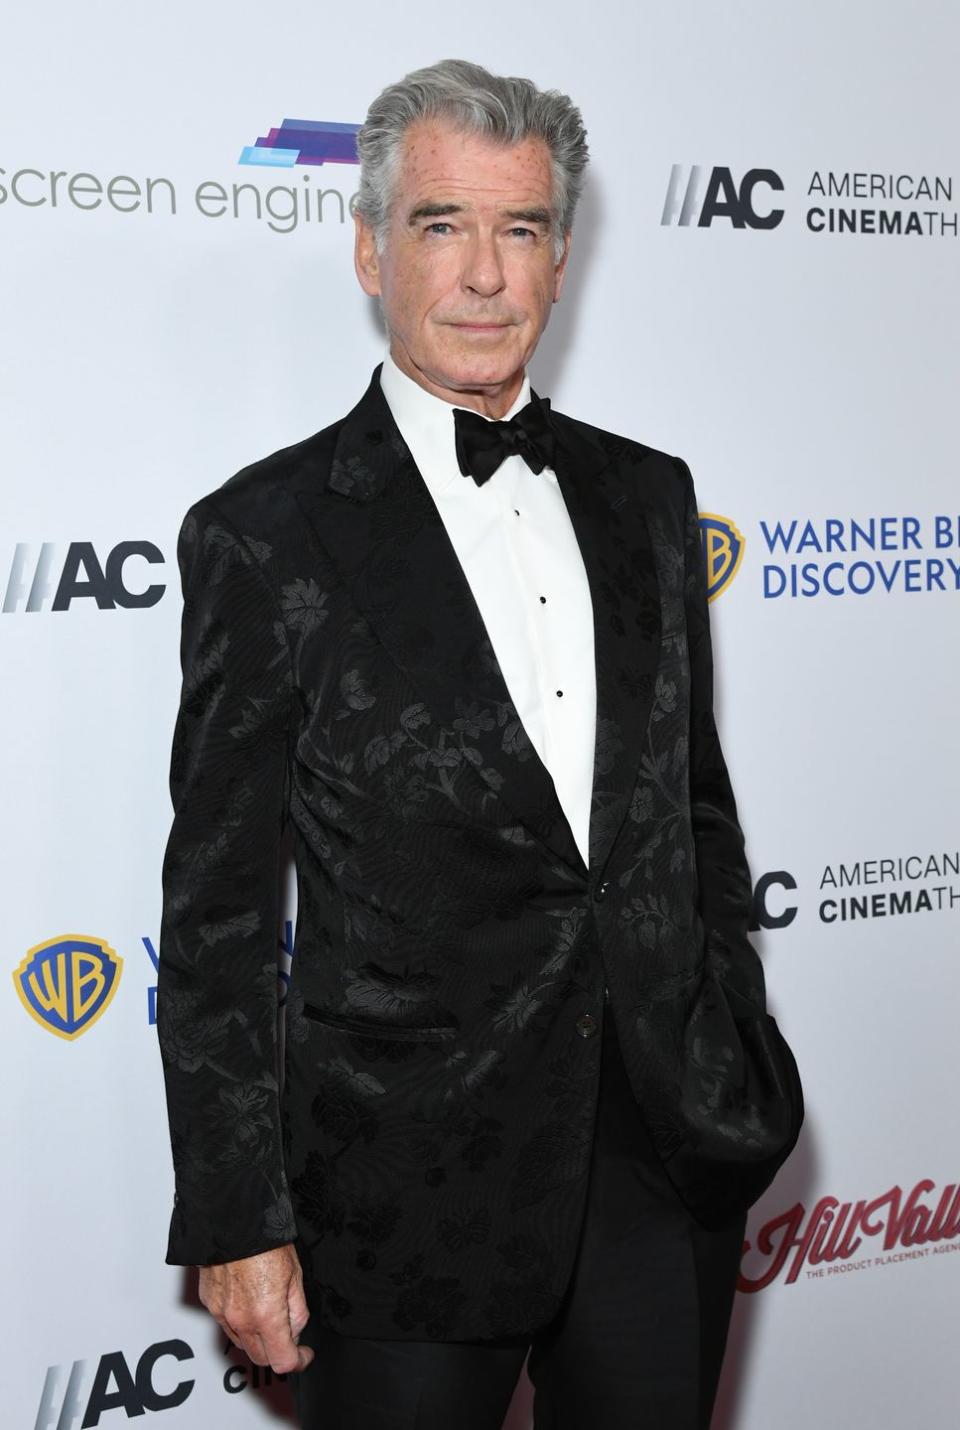 pierce brosnan, an older man stands looking at the camera with a neutral facial expression, he has grey hair and wears a black suit with bow tie